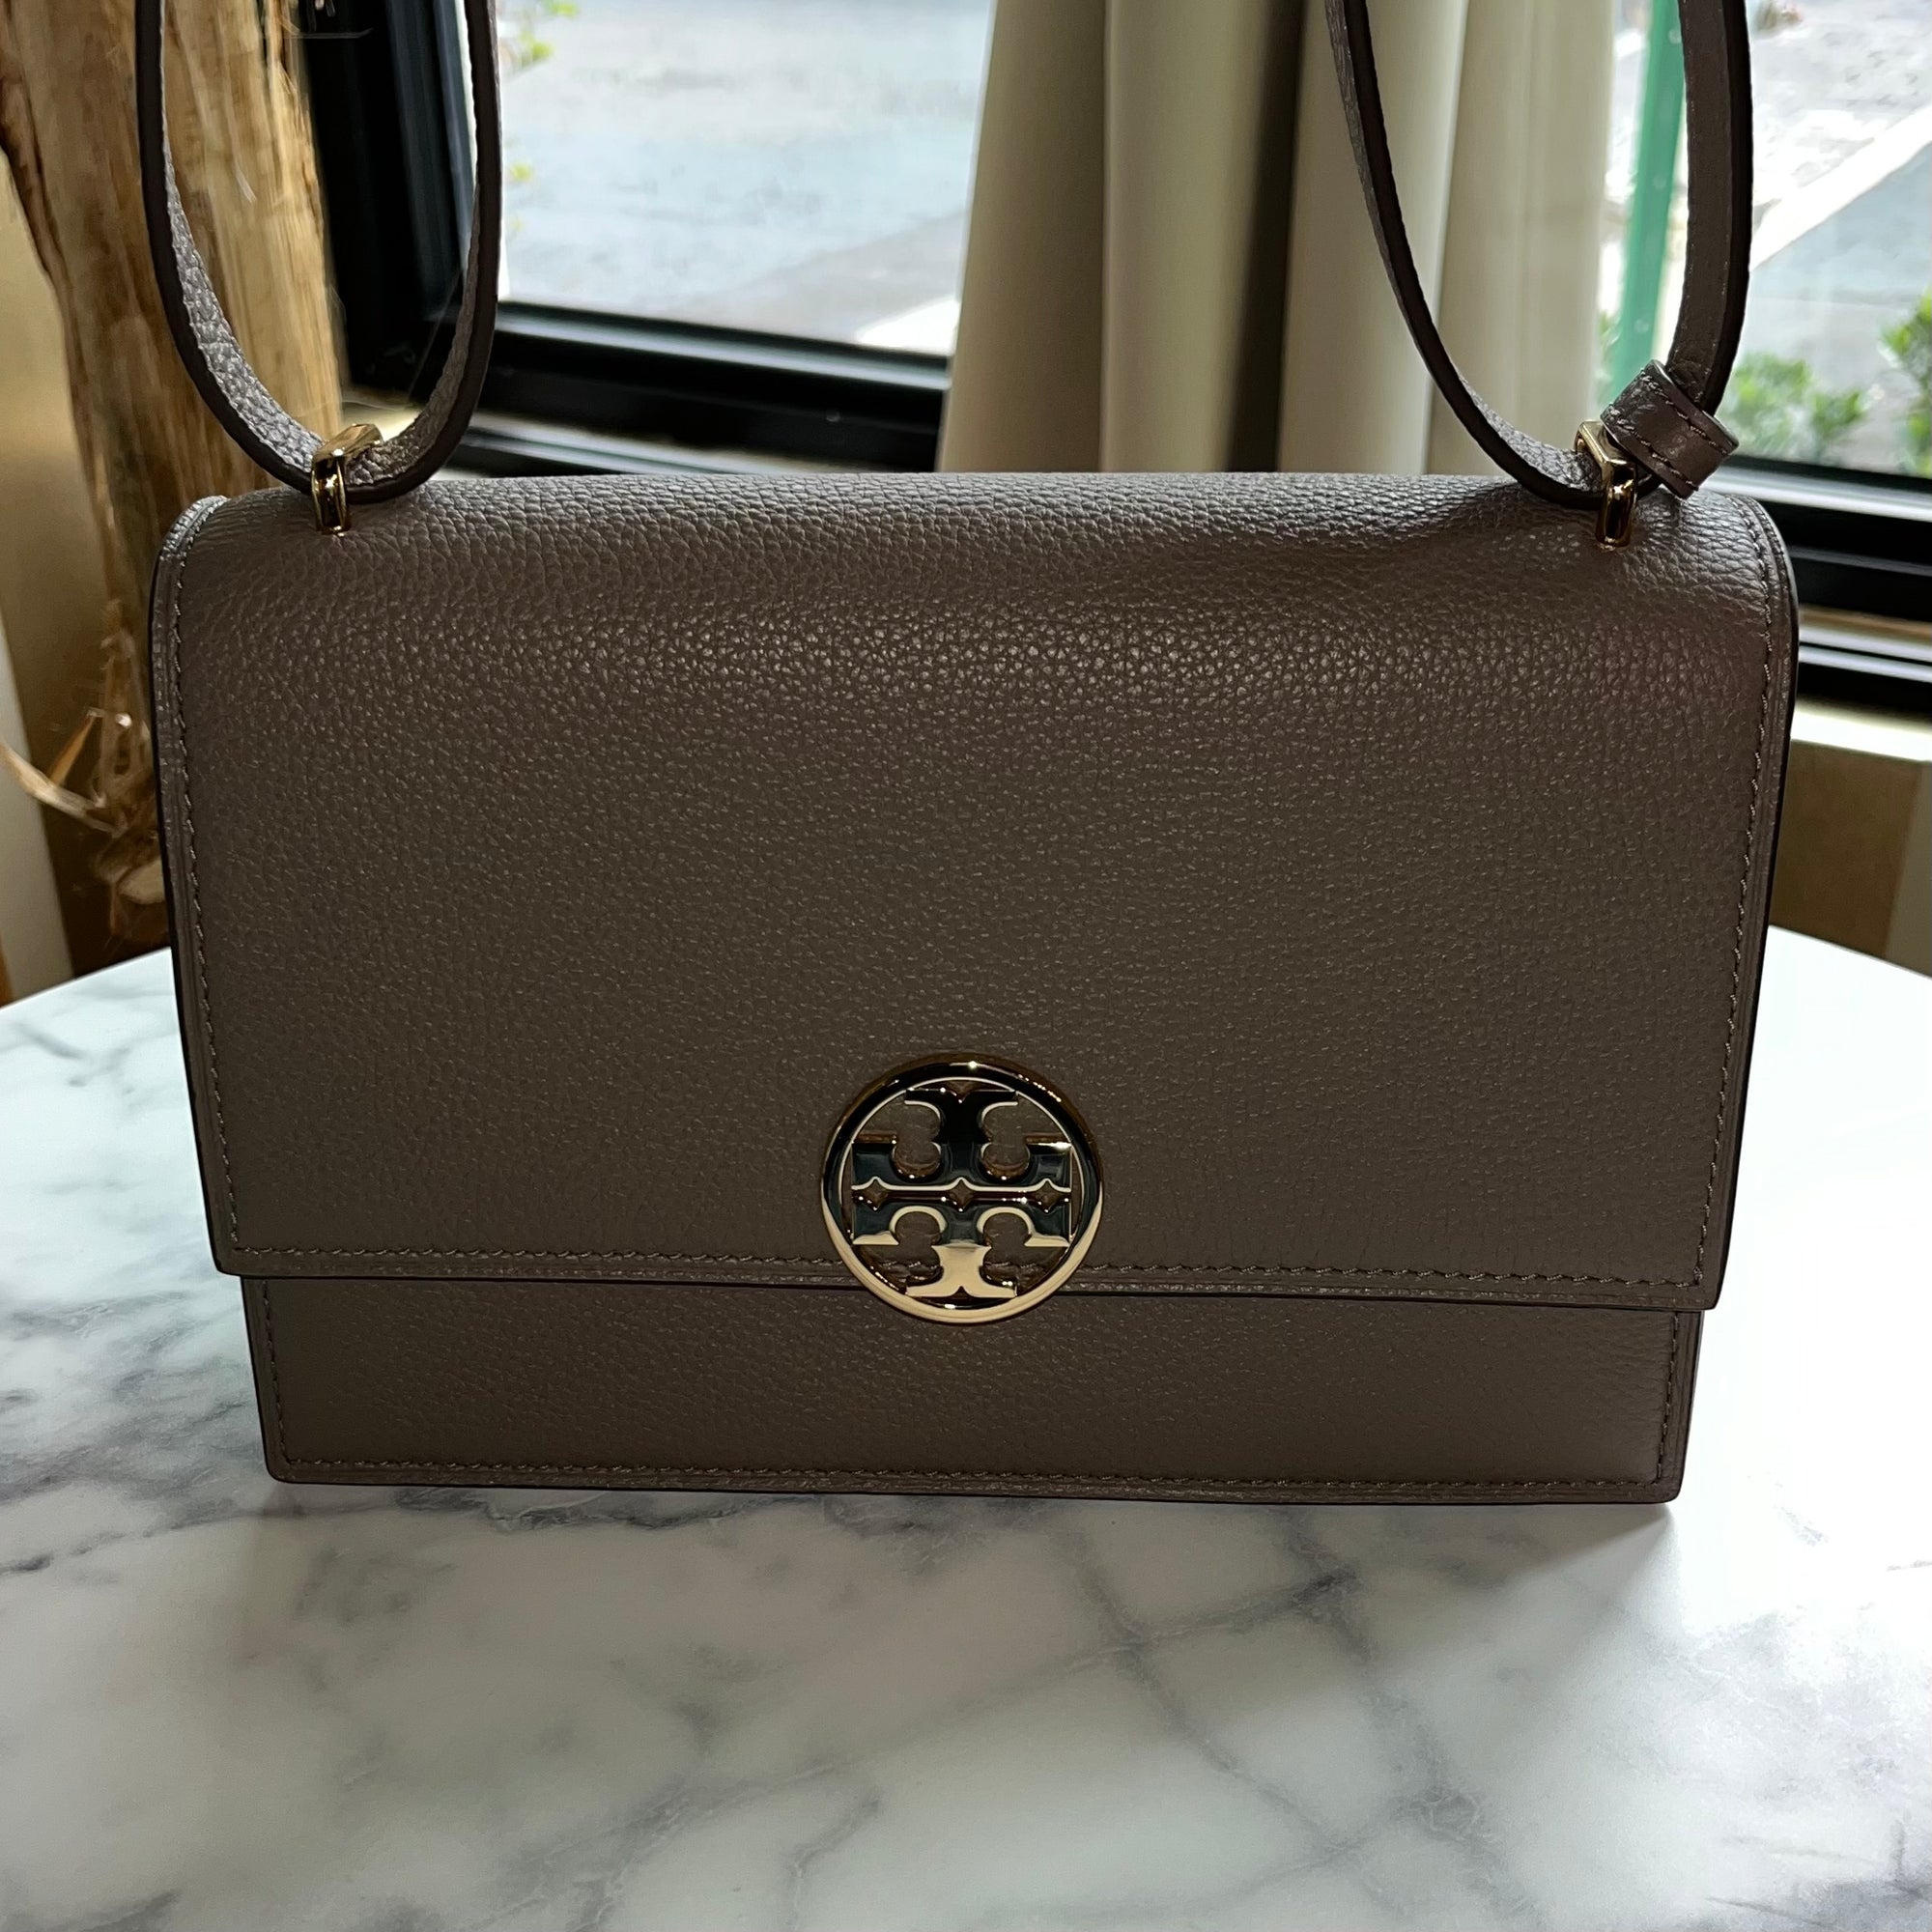 TORY BURCH Gray Leather Flap Bag